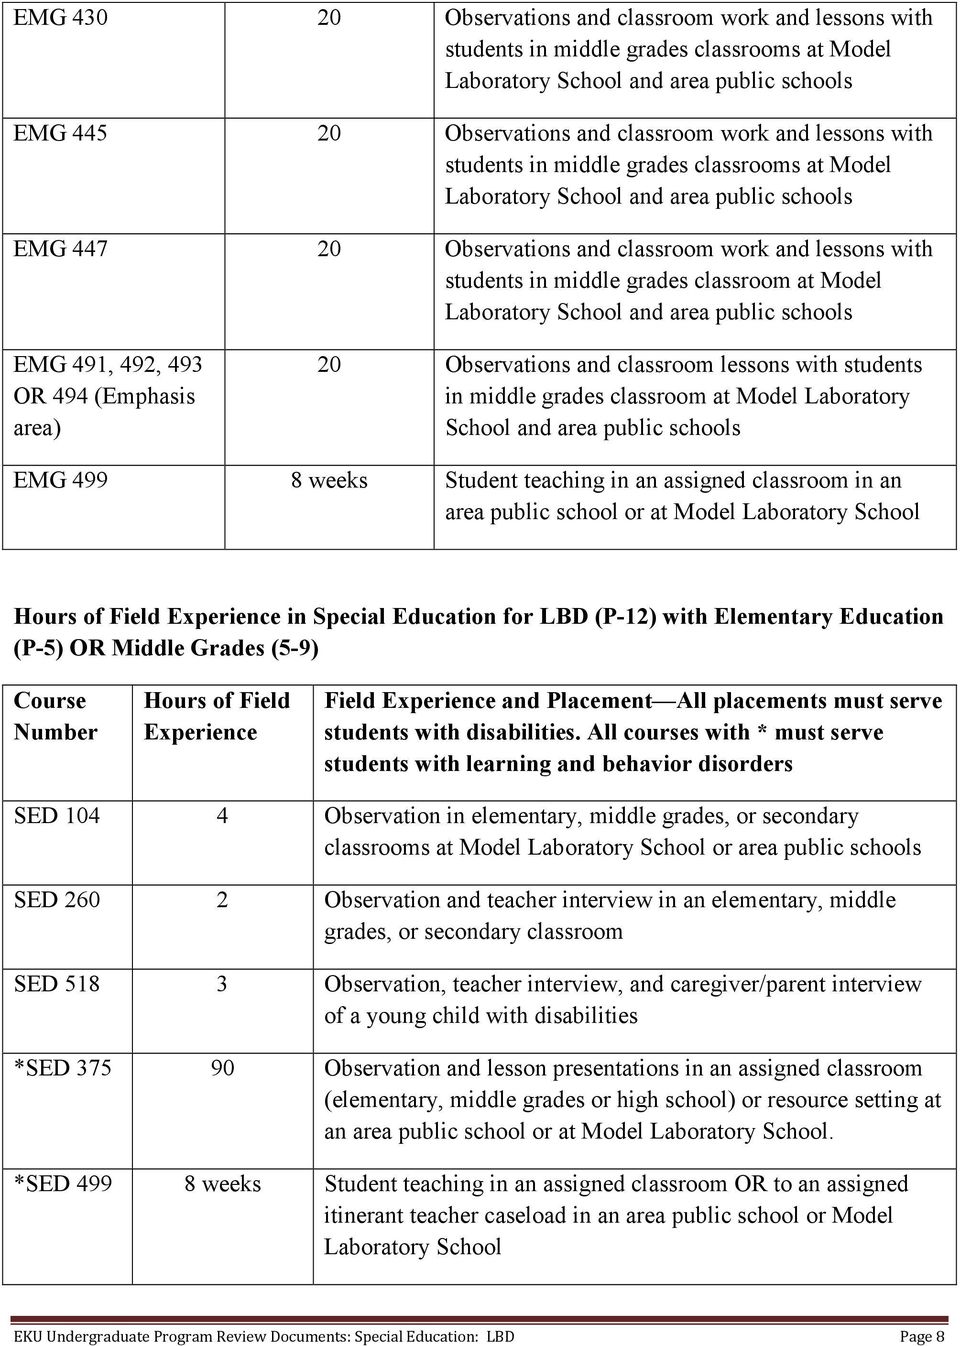 Model Laboratory School and area public schools EMG 491, 492, 493 OR 494 (Emphasis area) 20 Observations and classroom lessons with students in middle grades classroom at Model Laboratory School and